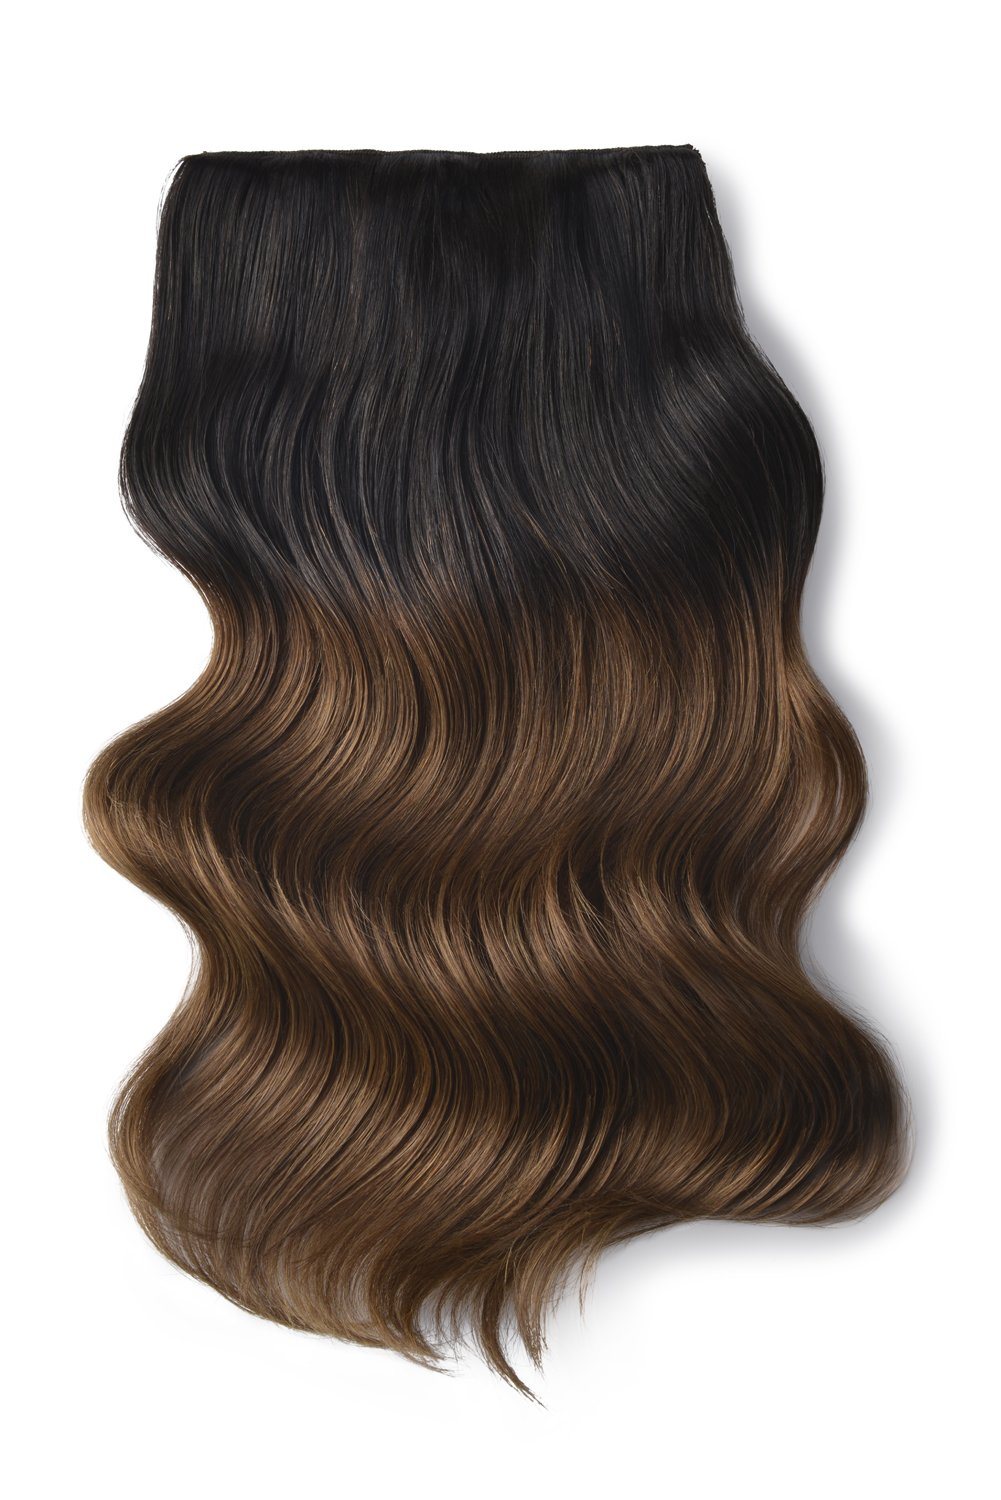 Double Wefted Full Head Remy Clip In Human Hair Extensions Ombre T2 6